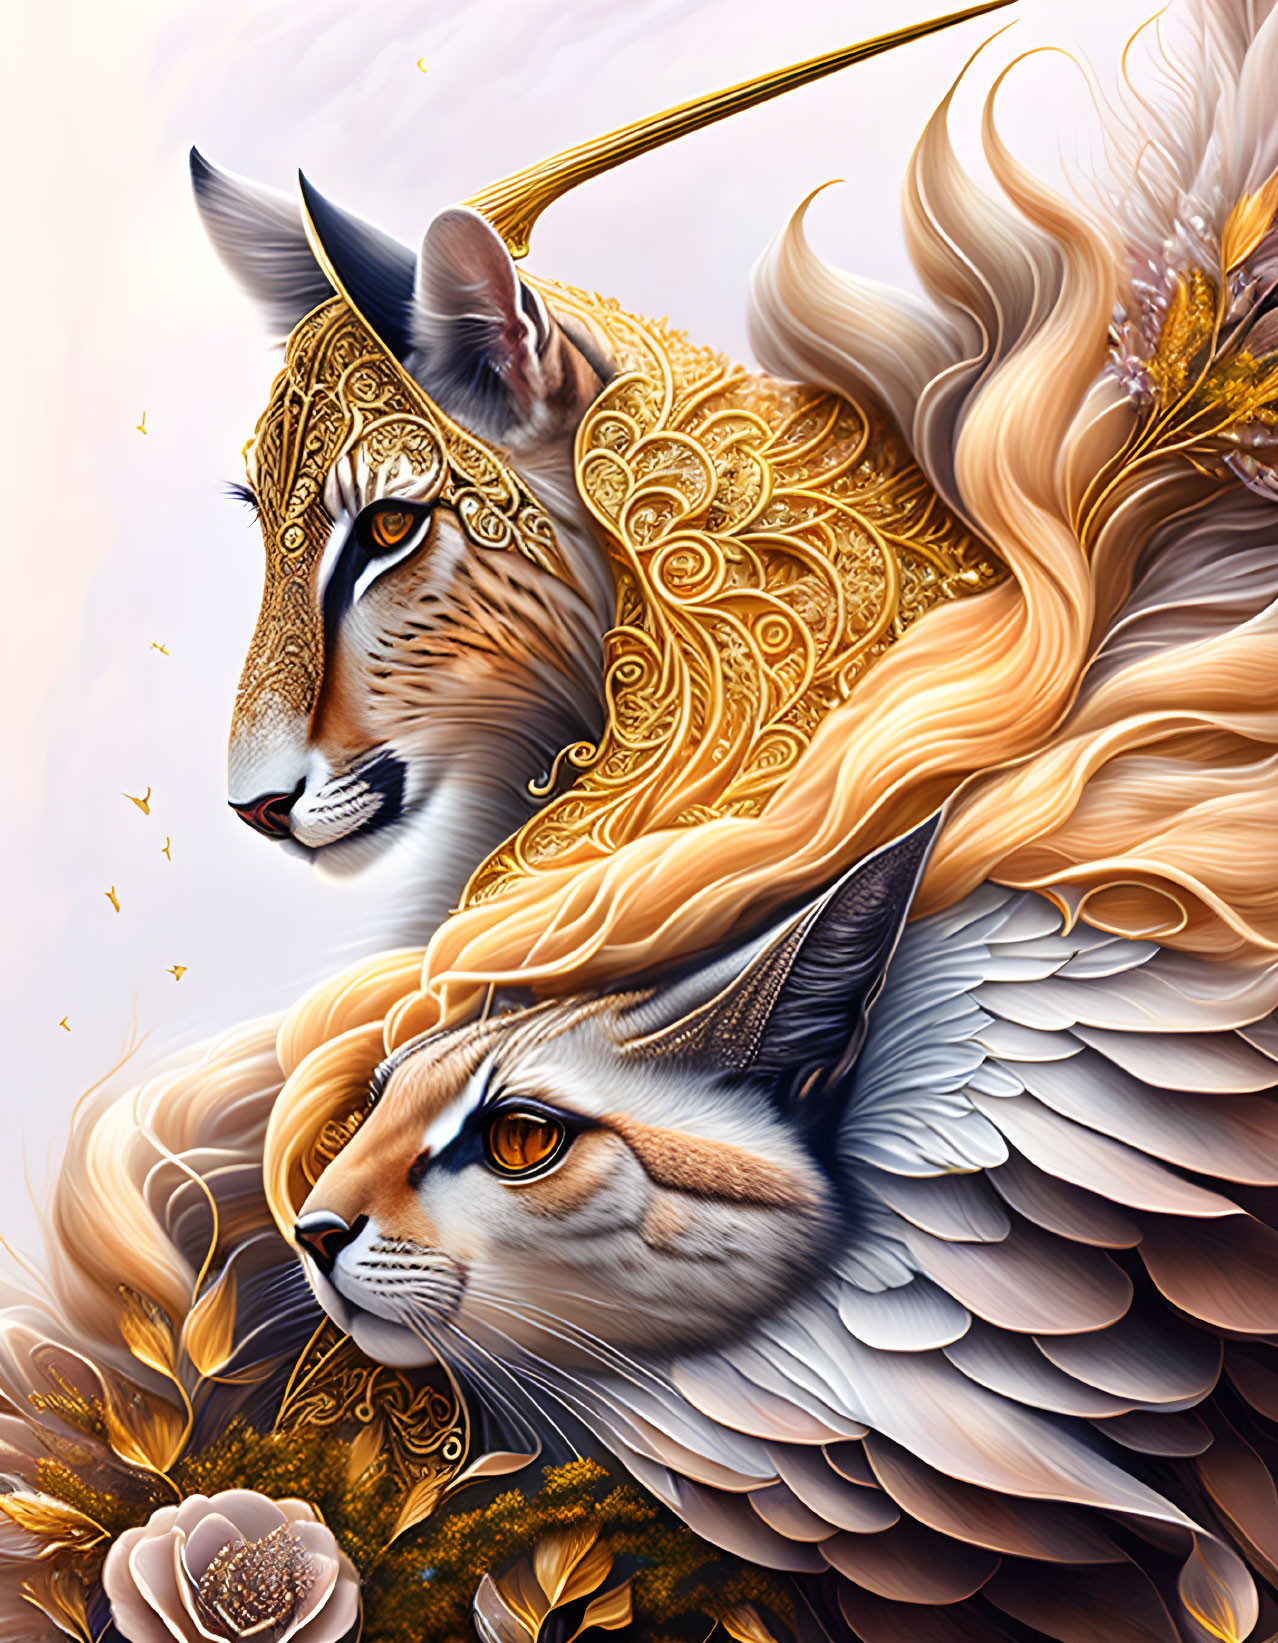 Digital artwork featuring majestic cats with gold adornments, one resembling a lynx and the other with angel